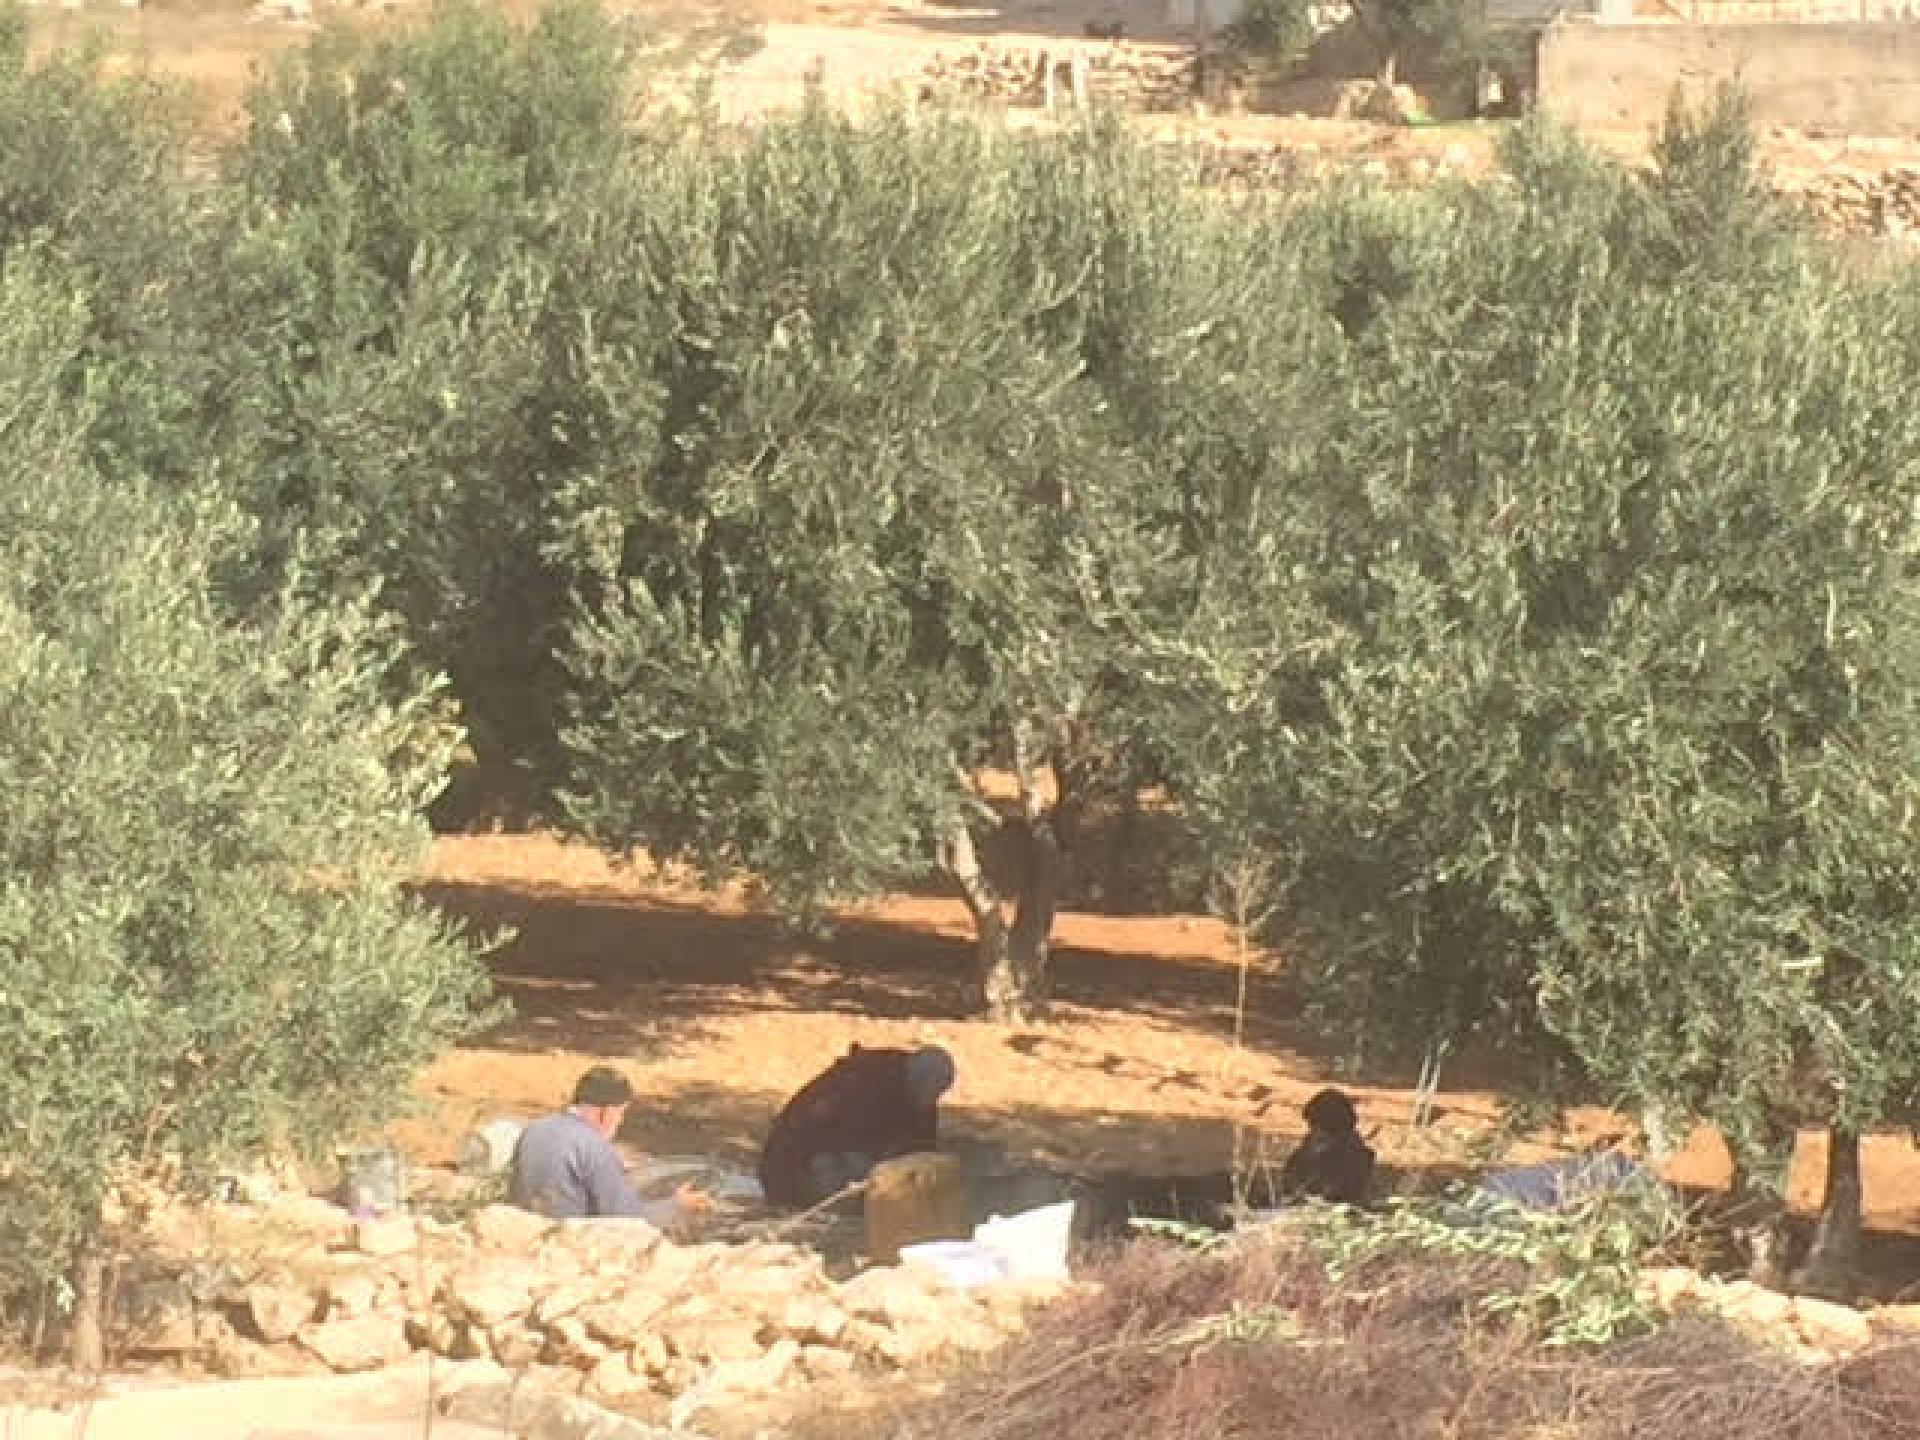 First rain and the Palestinians are in a hurry to finish the olive harvest